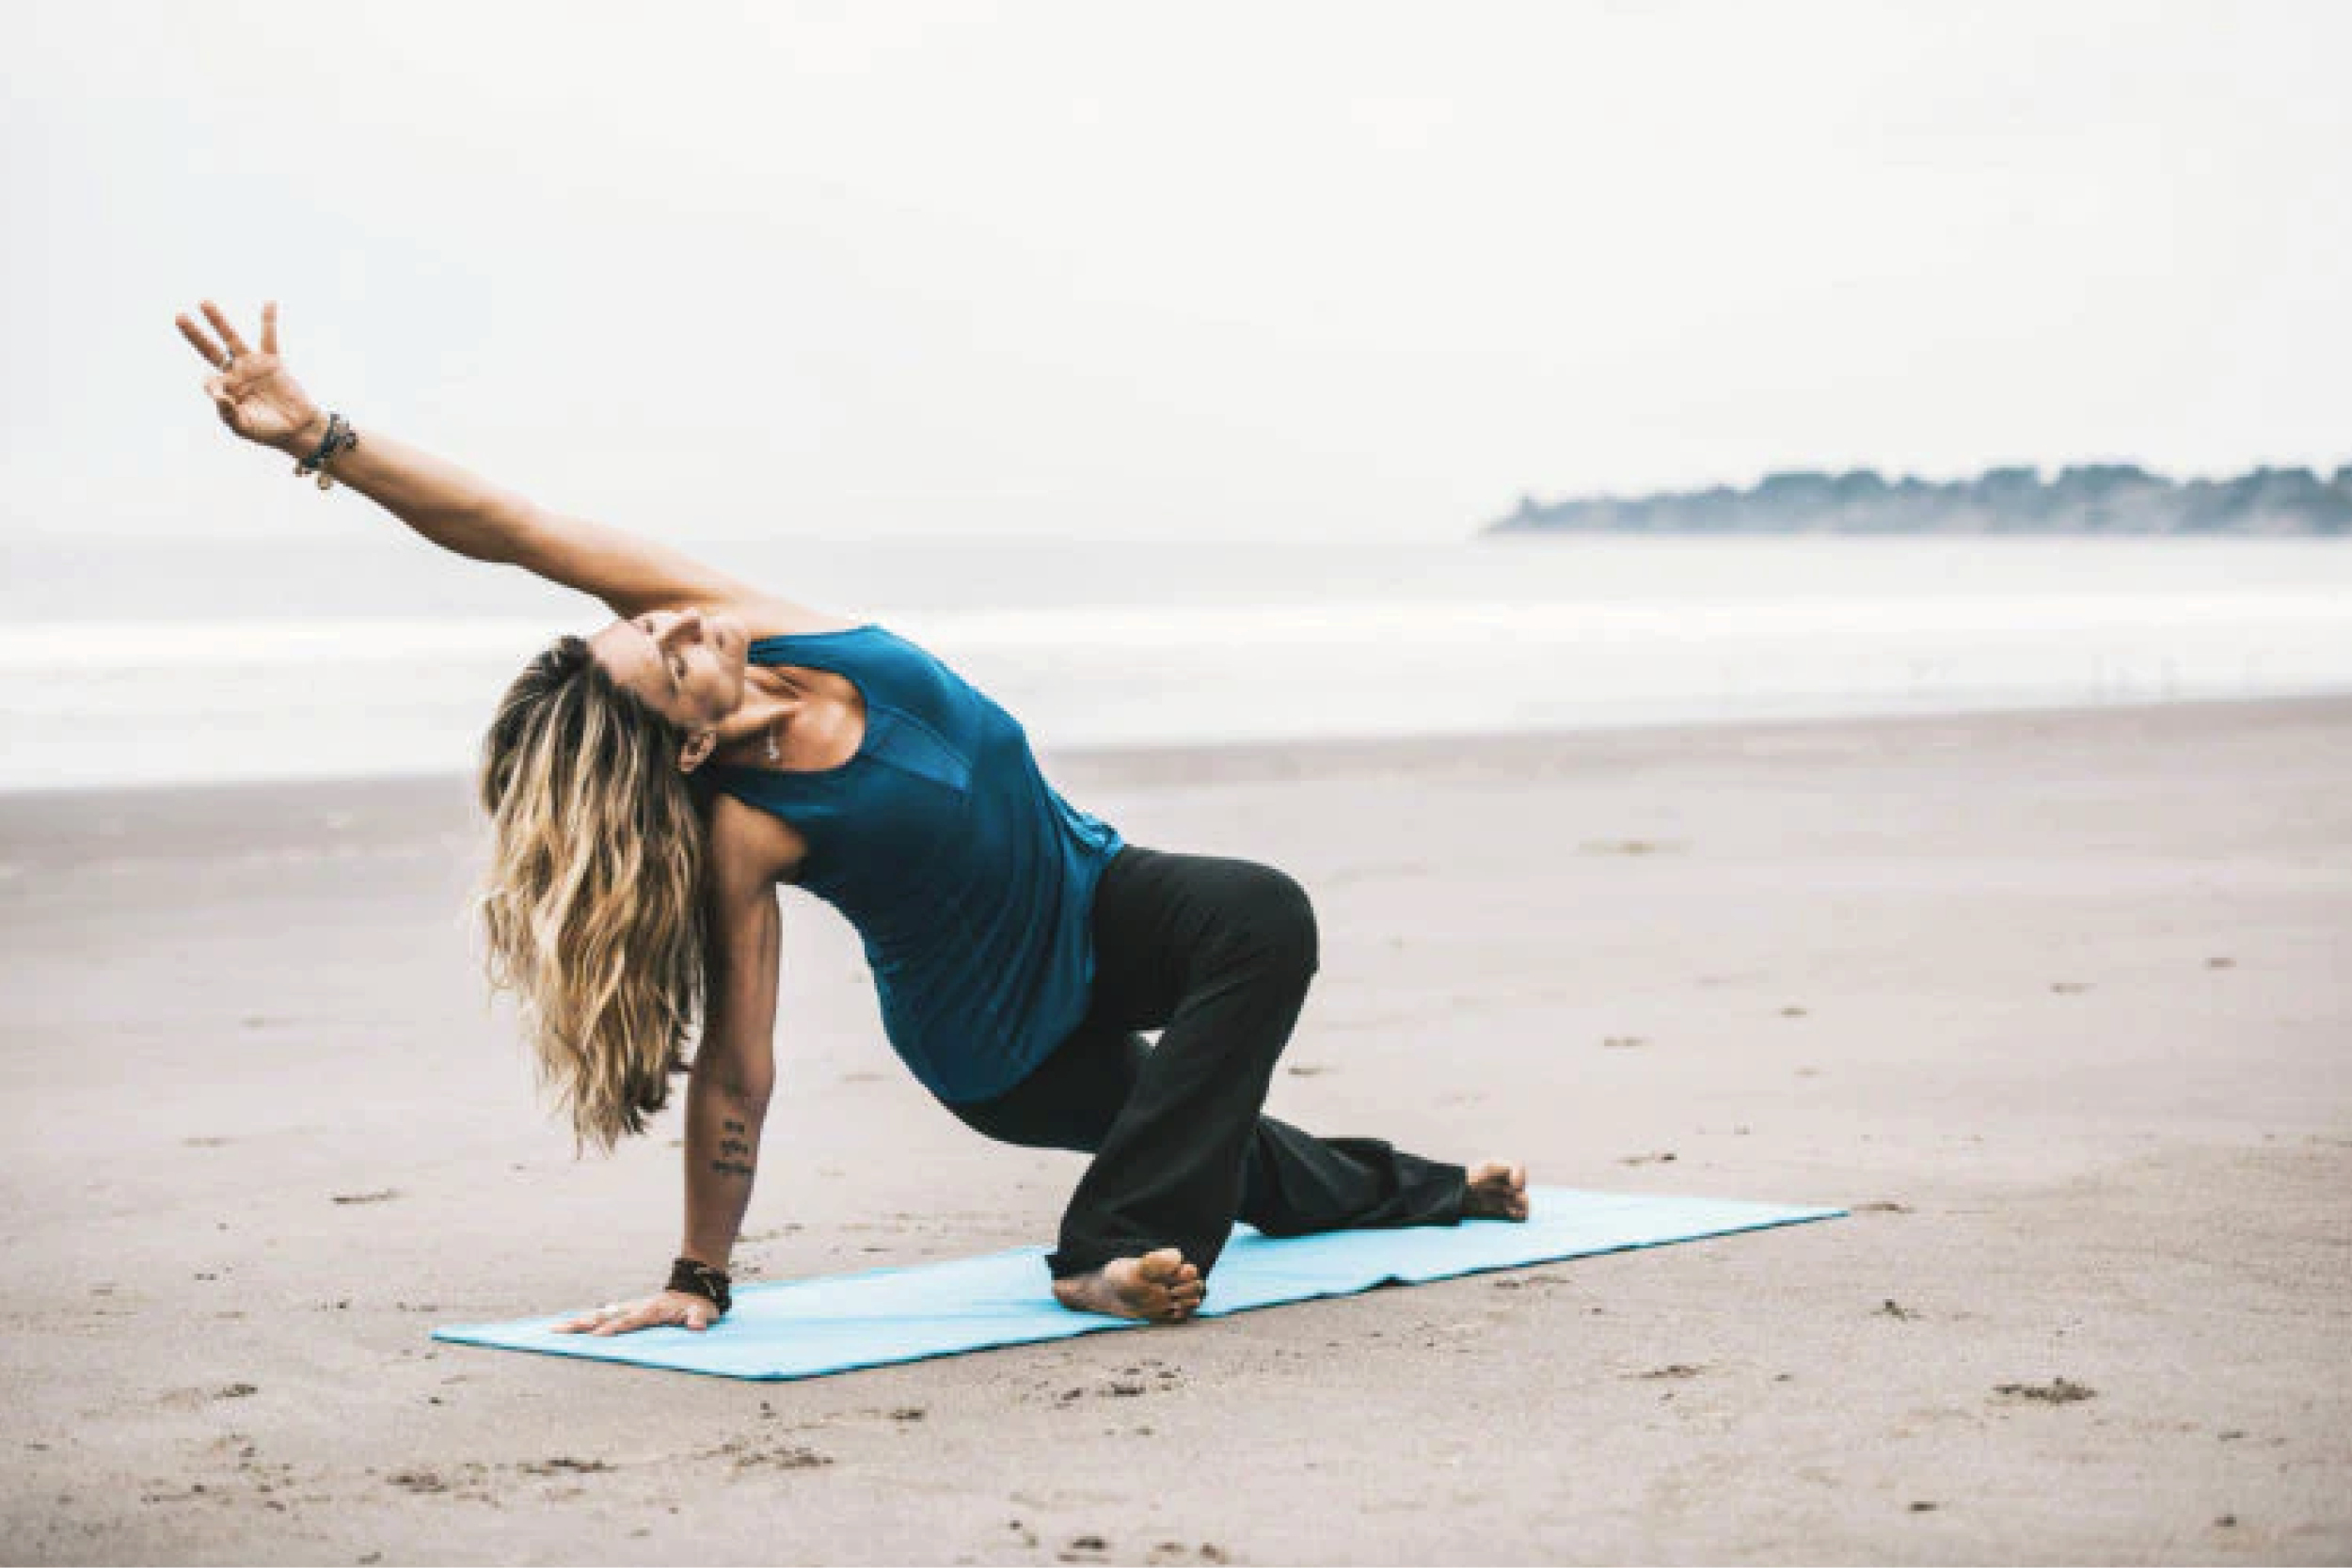 Yoga For Mental Health: Get Past Lockdown Blues With These Superb Yoga Poses